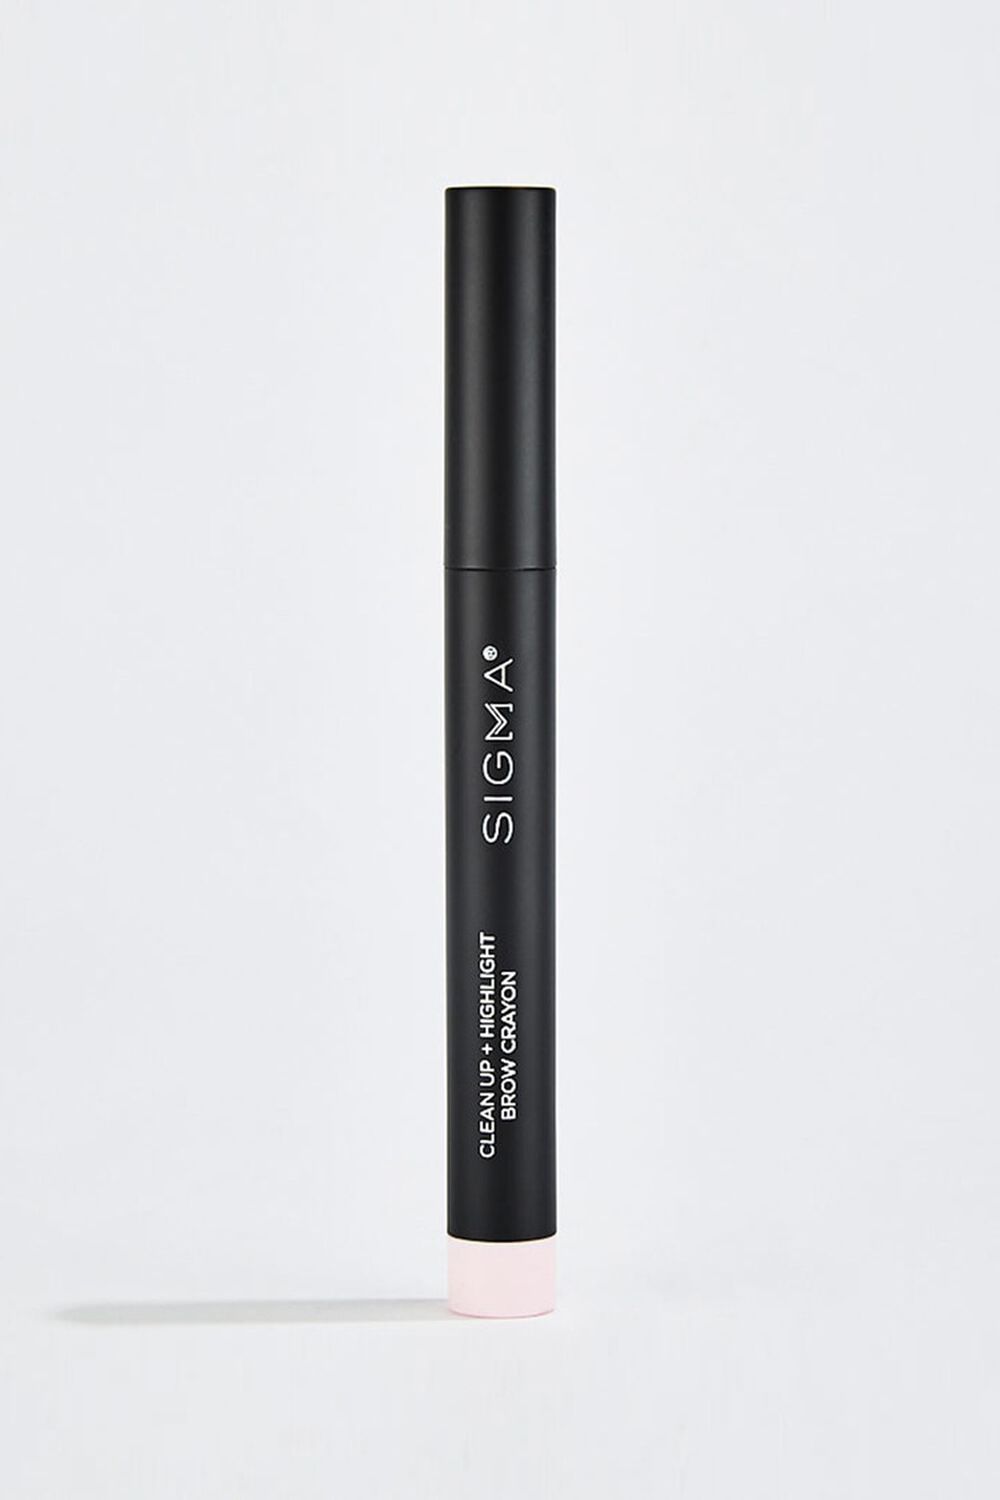 Sigma Beauty Clean Up & Highlight Brow Crayon, image 2